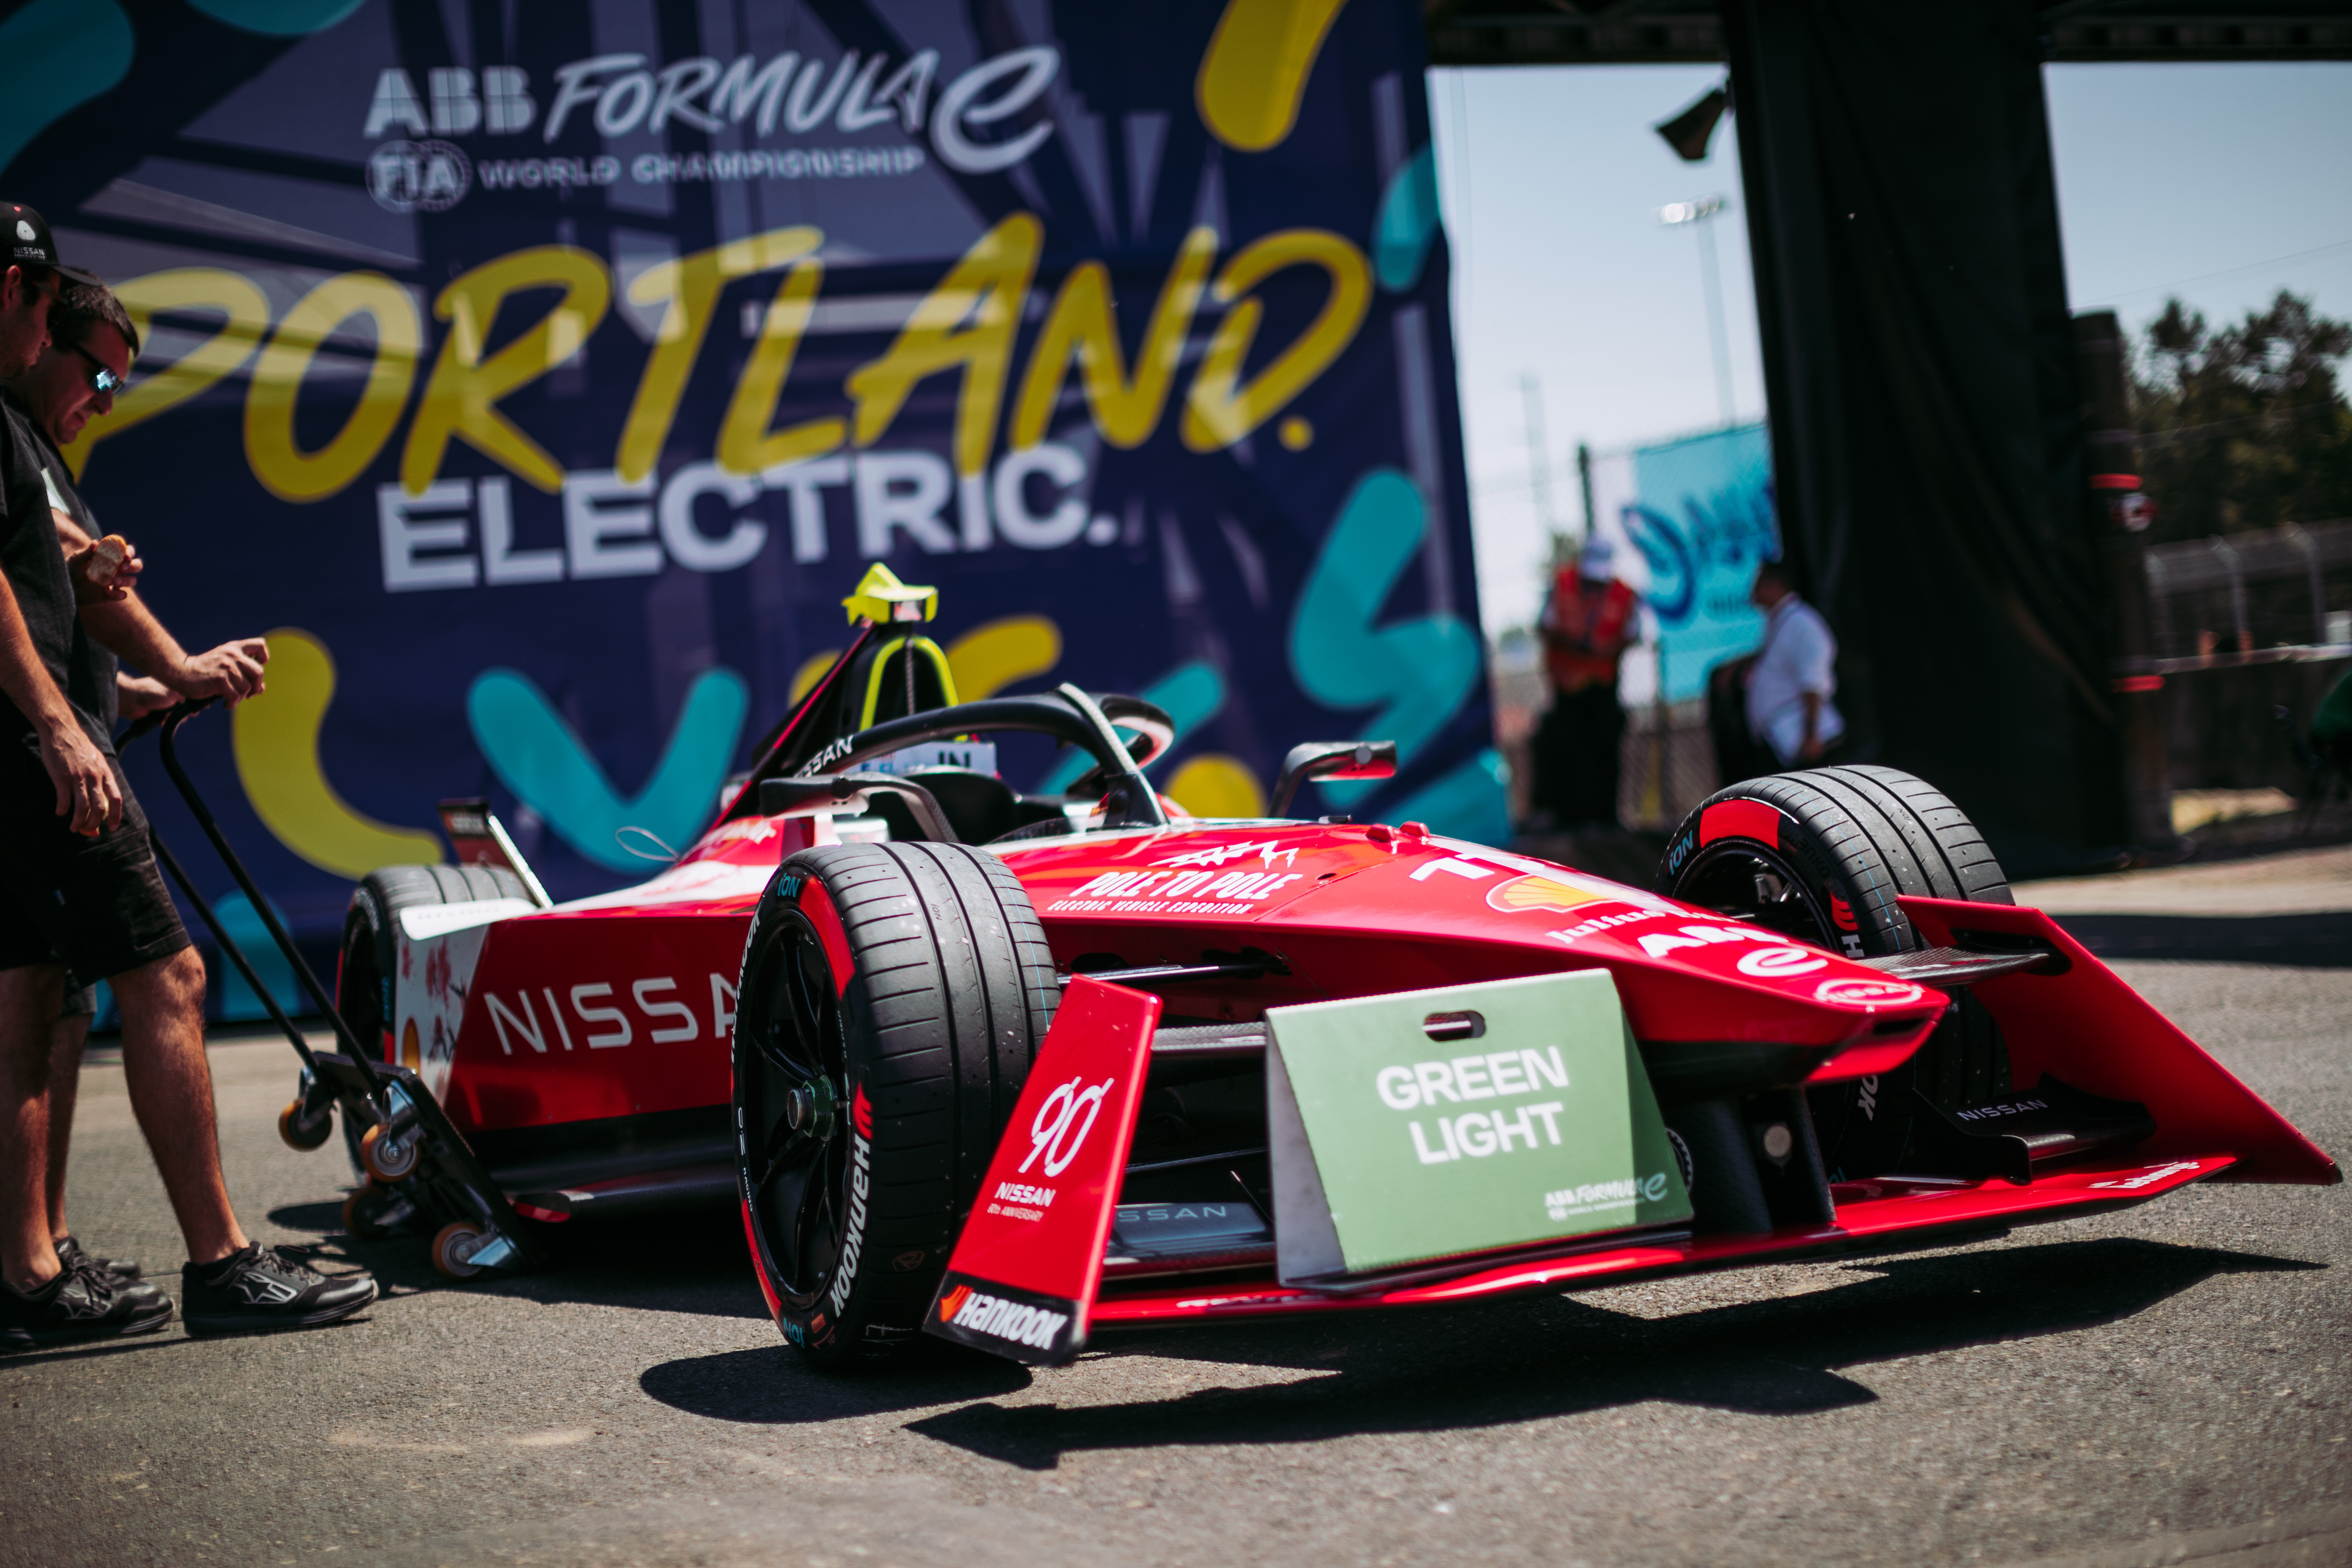 Formula e car in pit stop